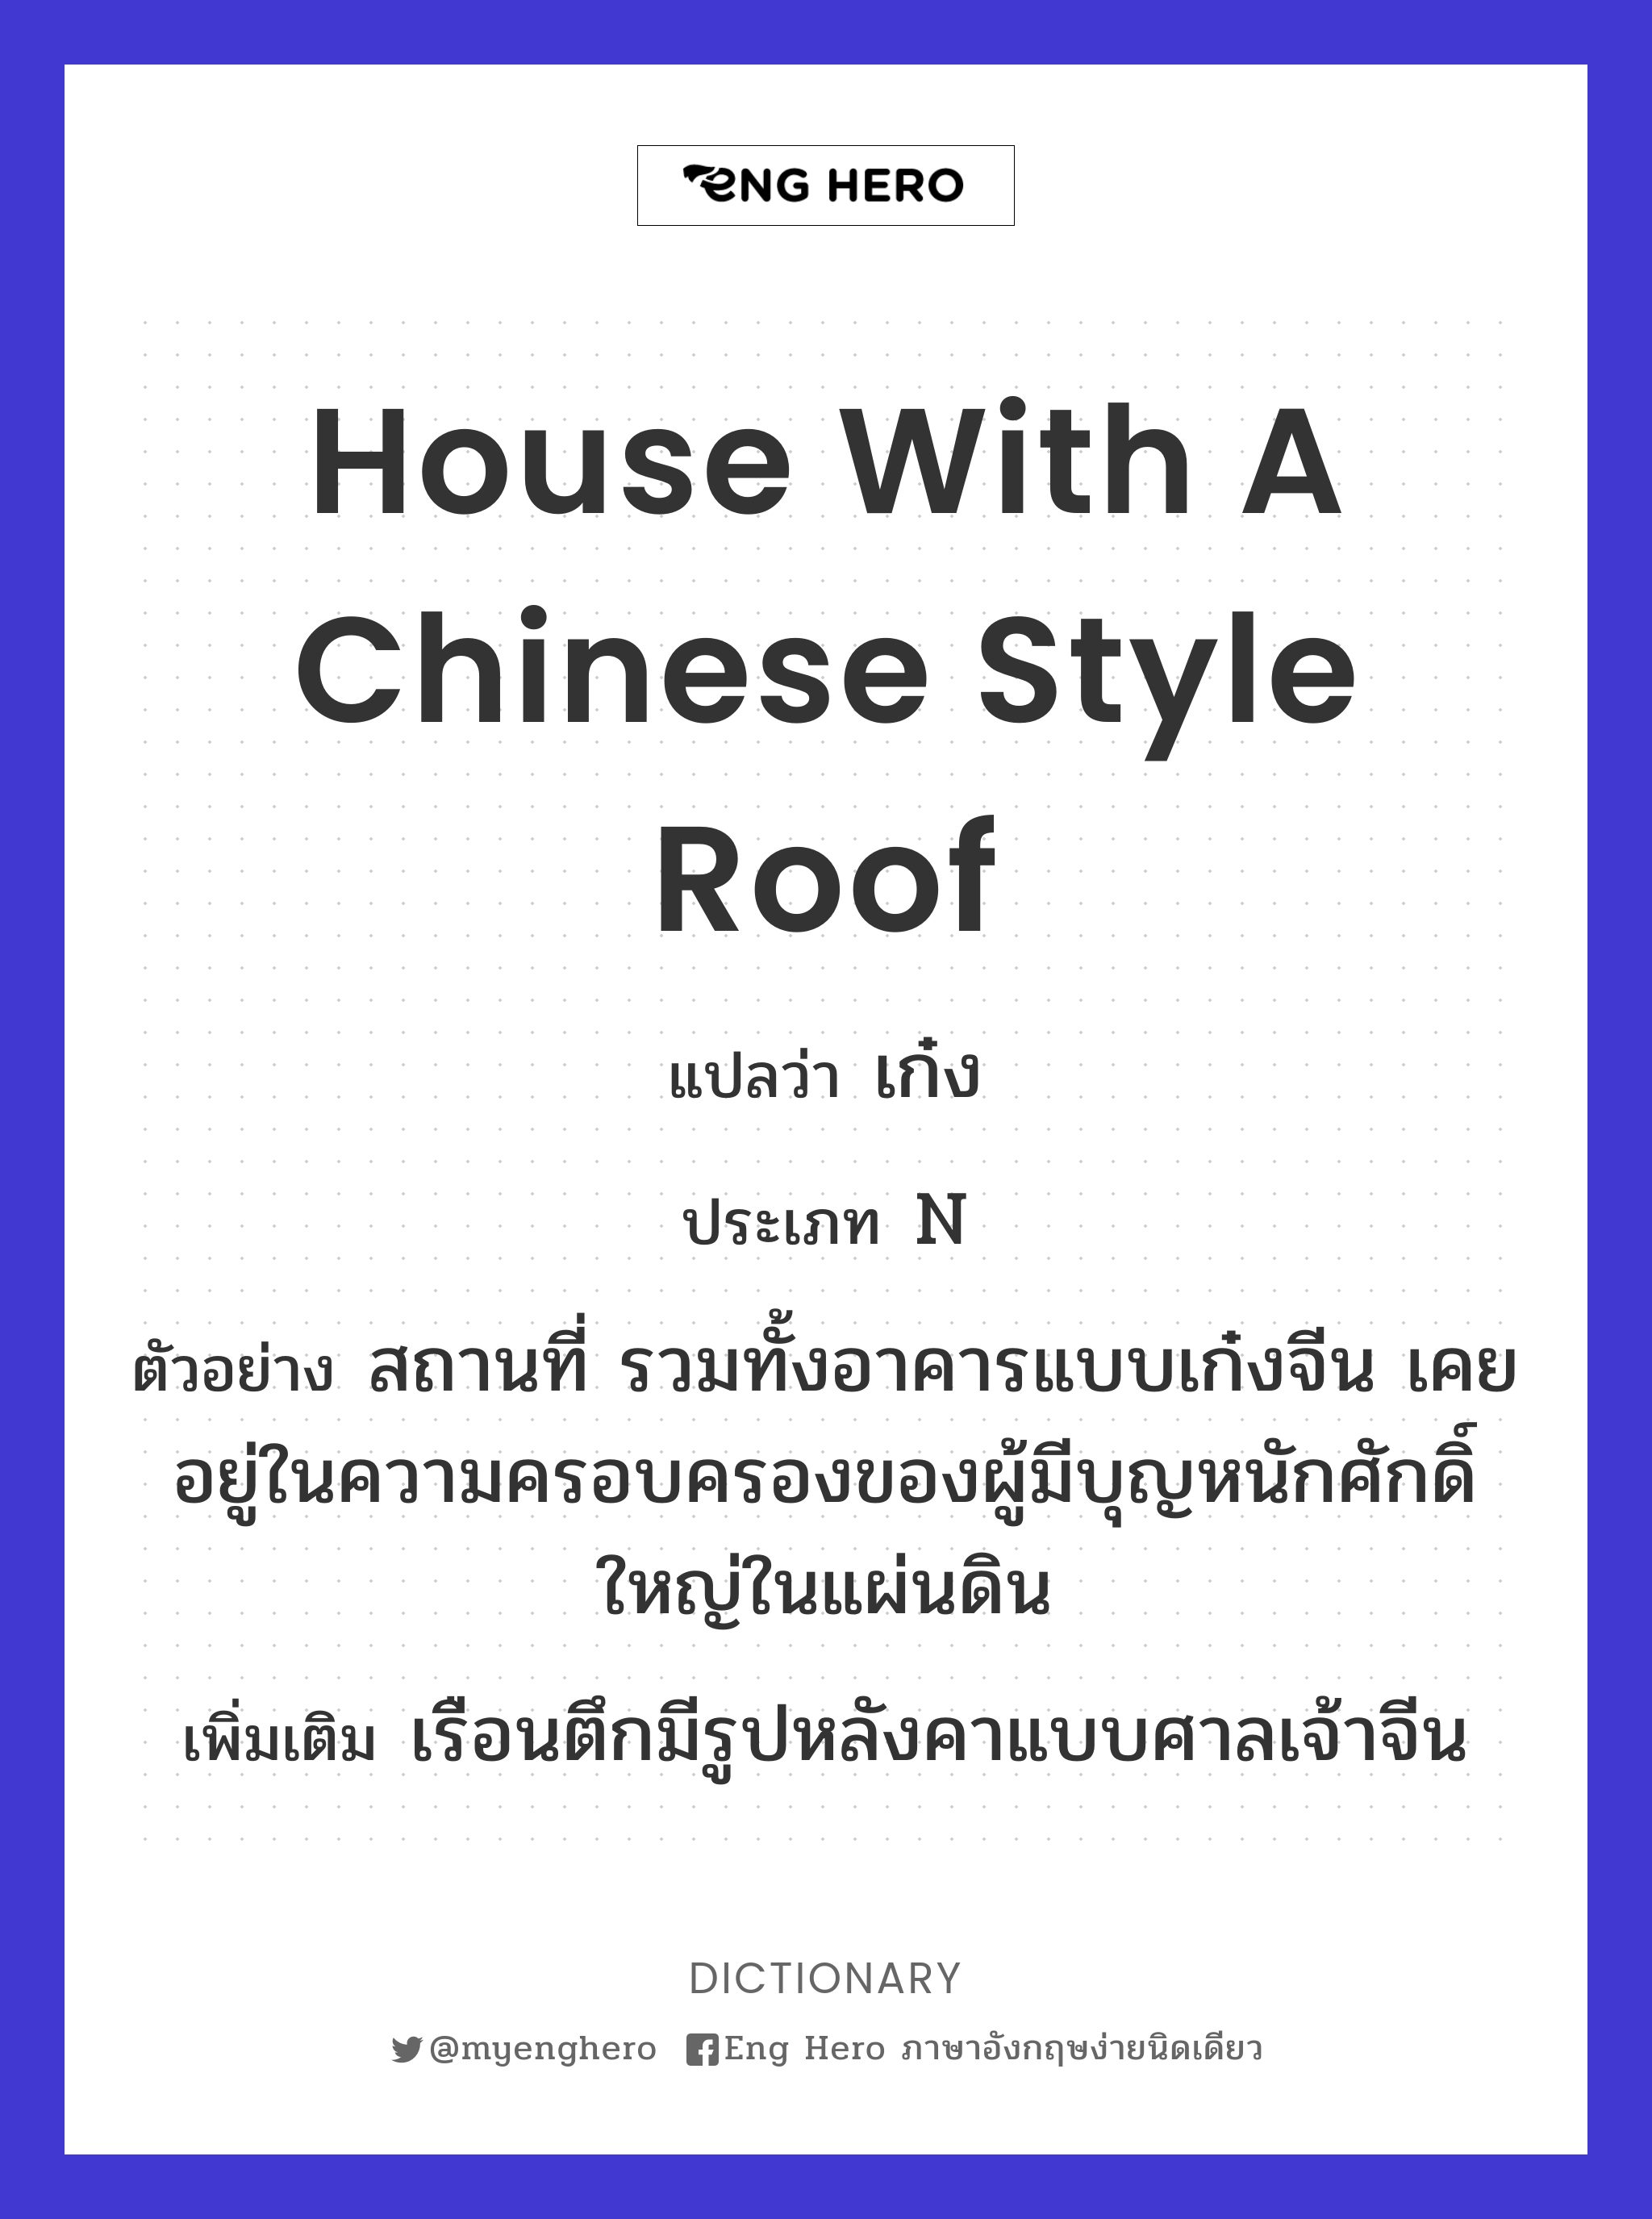 house with a Chinese style roof